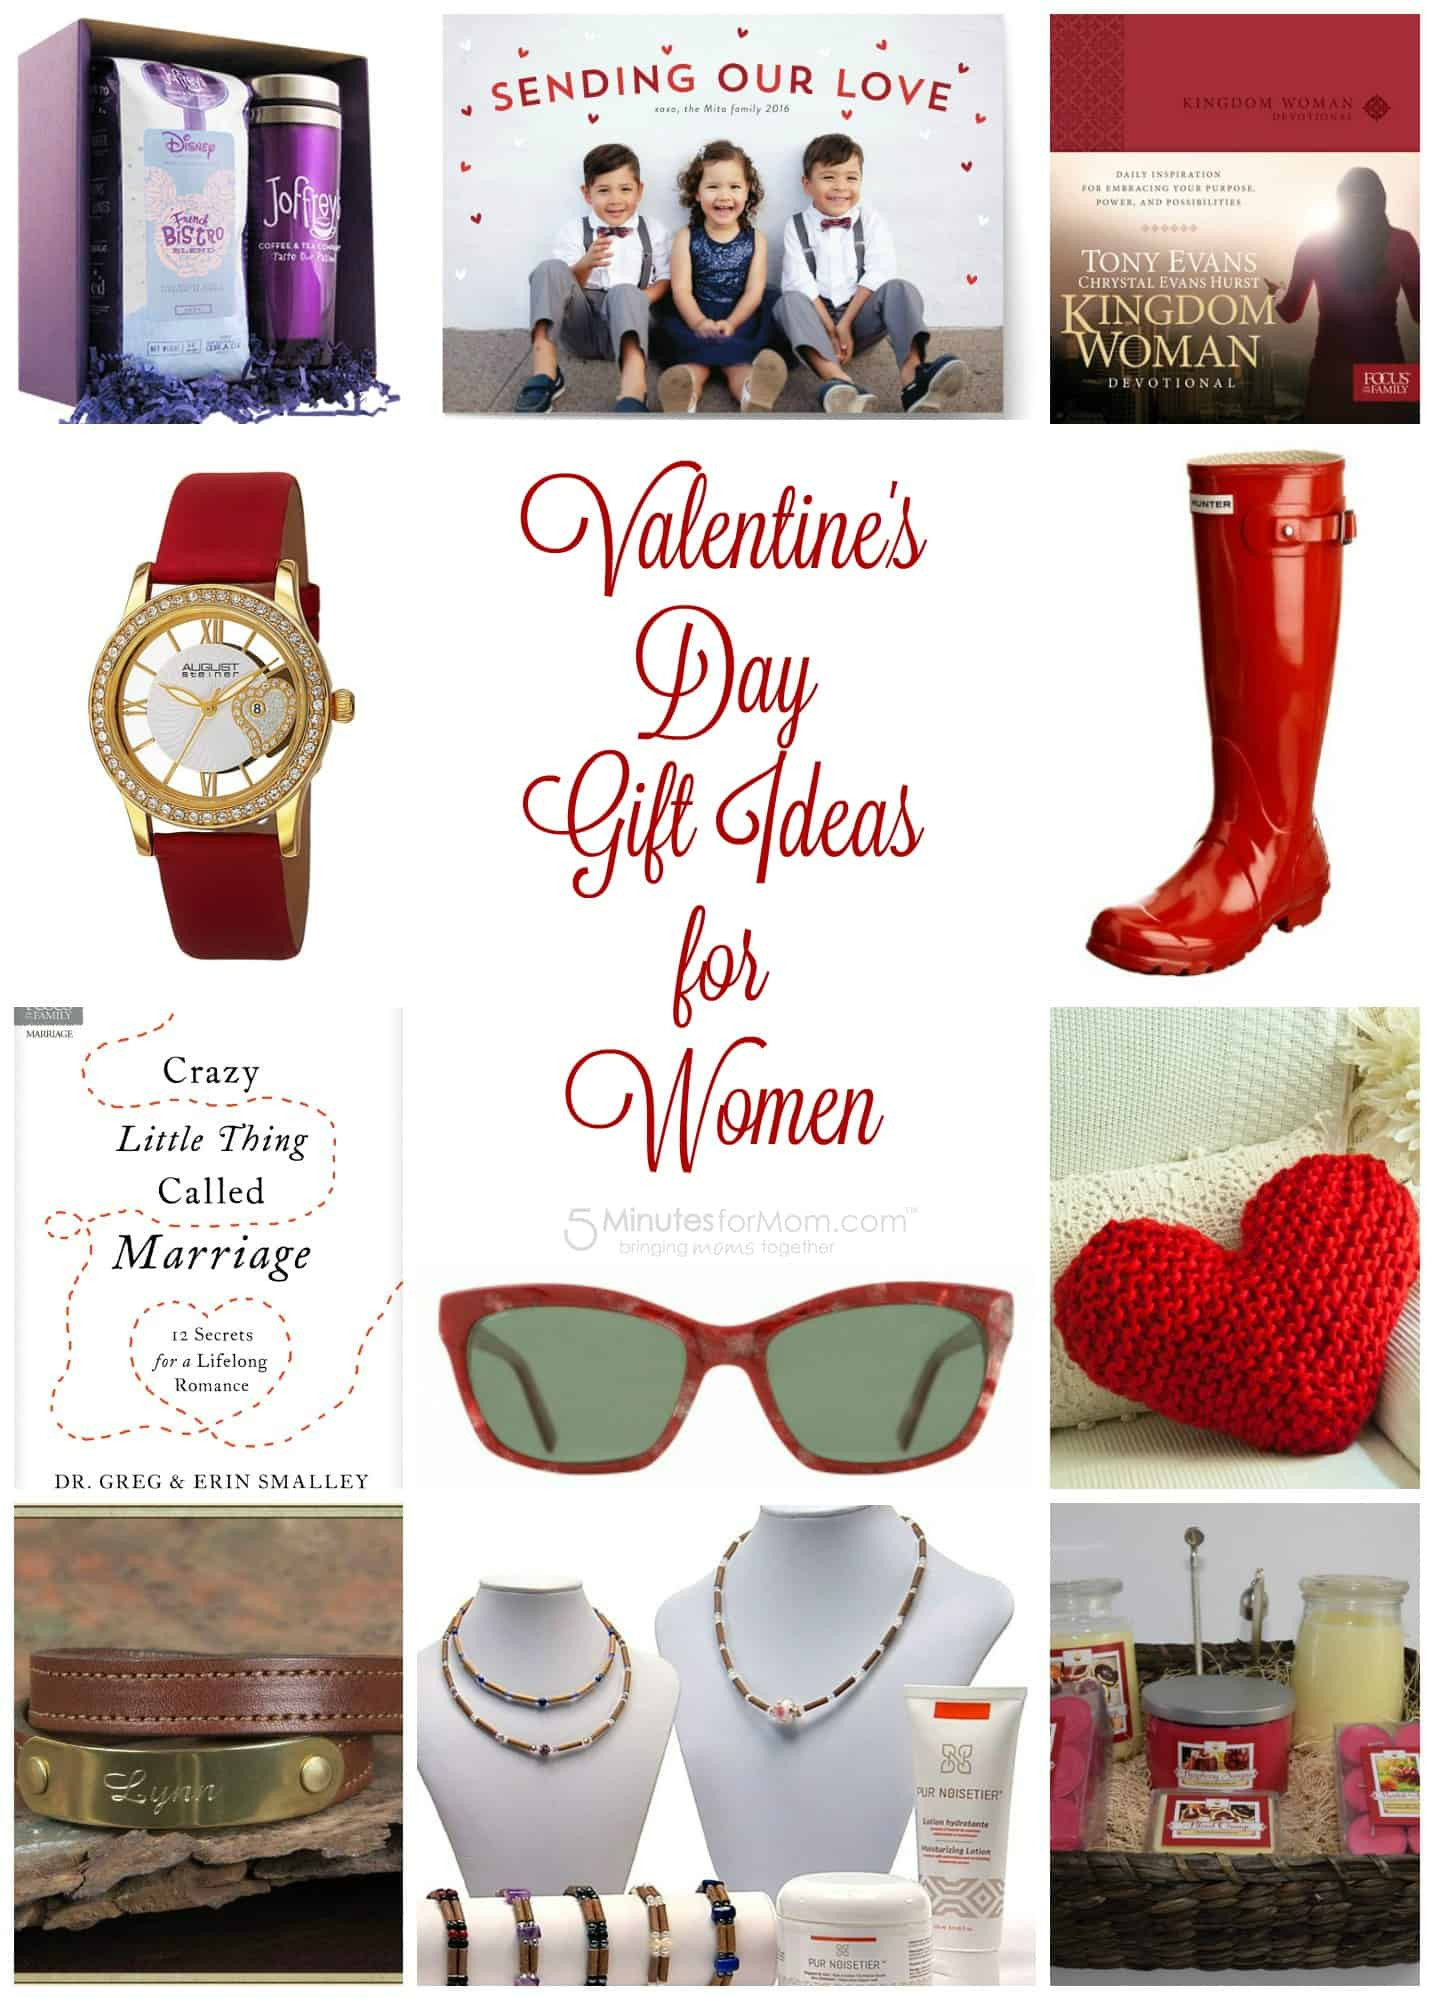 Valentines Day Gift For Girls
 Valentine s Day Gift Guide for Women Plus $100 Amazon